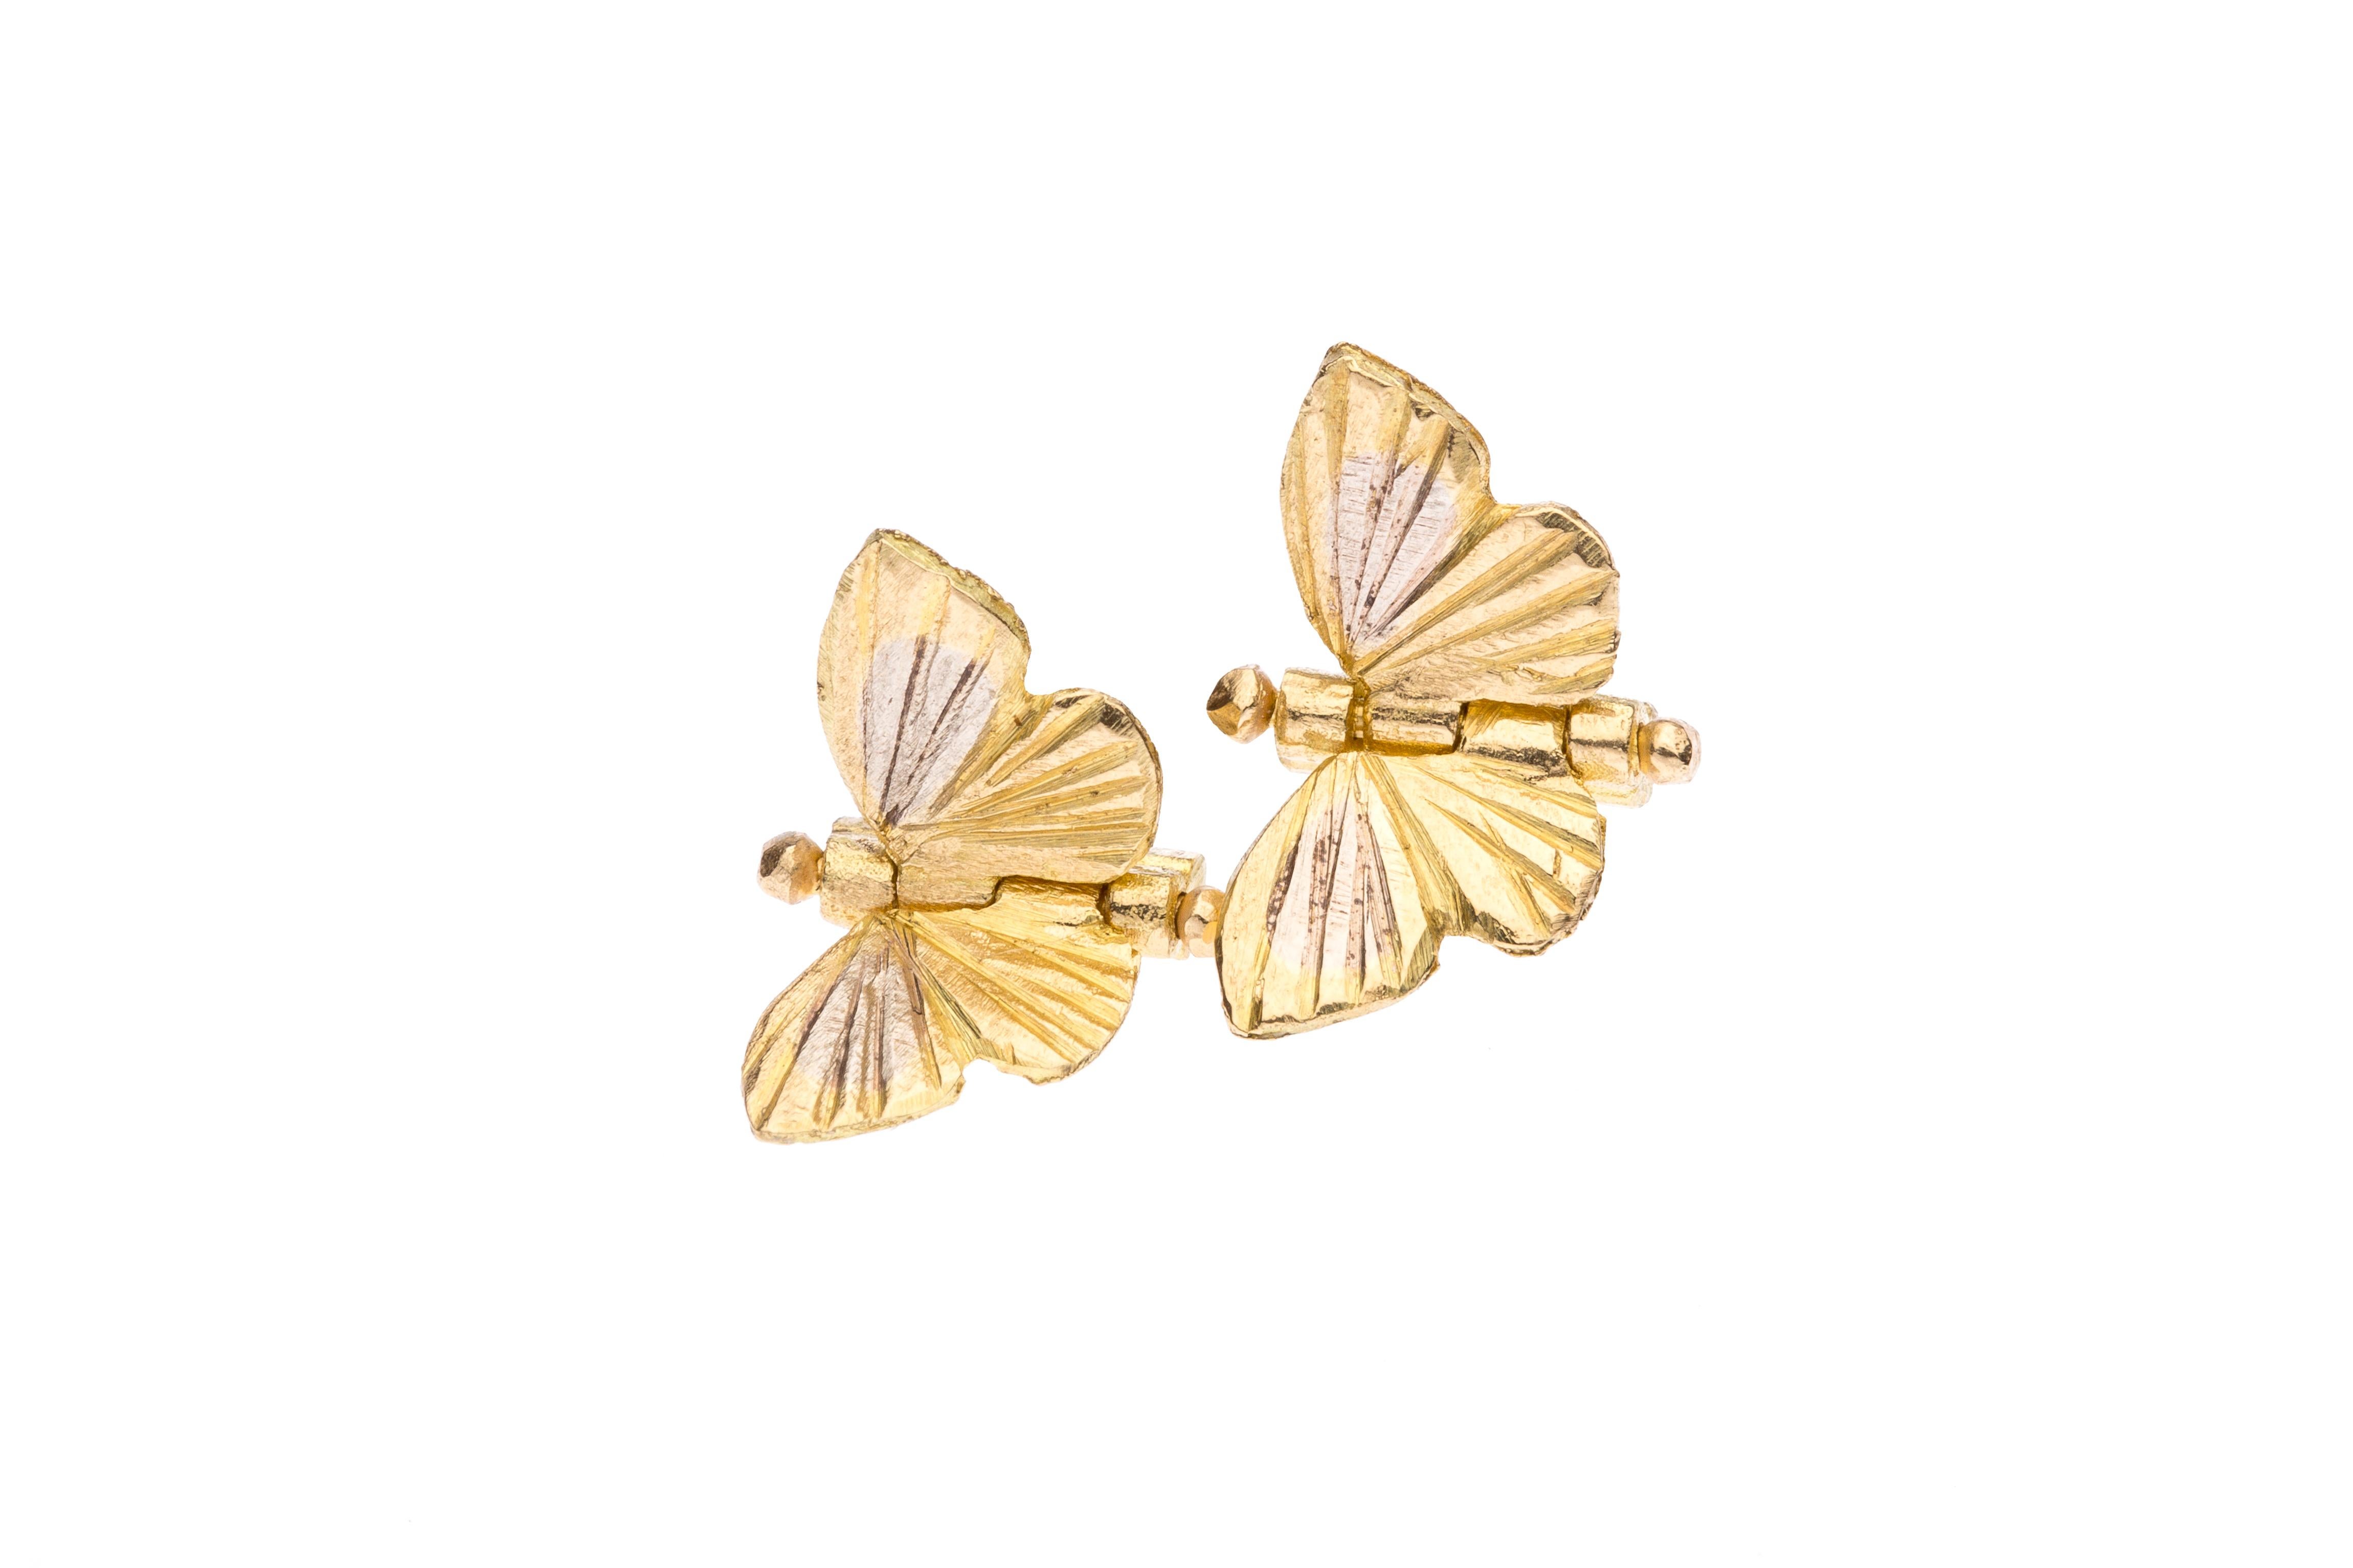 James Banks's signature butterfly stud earrings feature two Tiny Asterope butterflies with a hinge in the center to allow the wings to move, set in 18k Yellow Gold with 18k White Gold inlay. 
18k Yellow Gold, 18k White Gold
Handmade in Northern